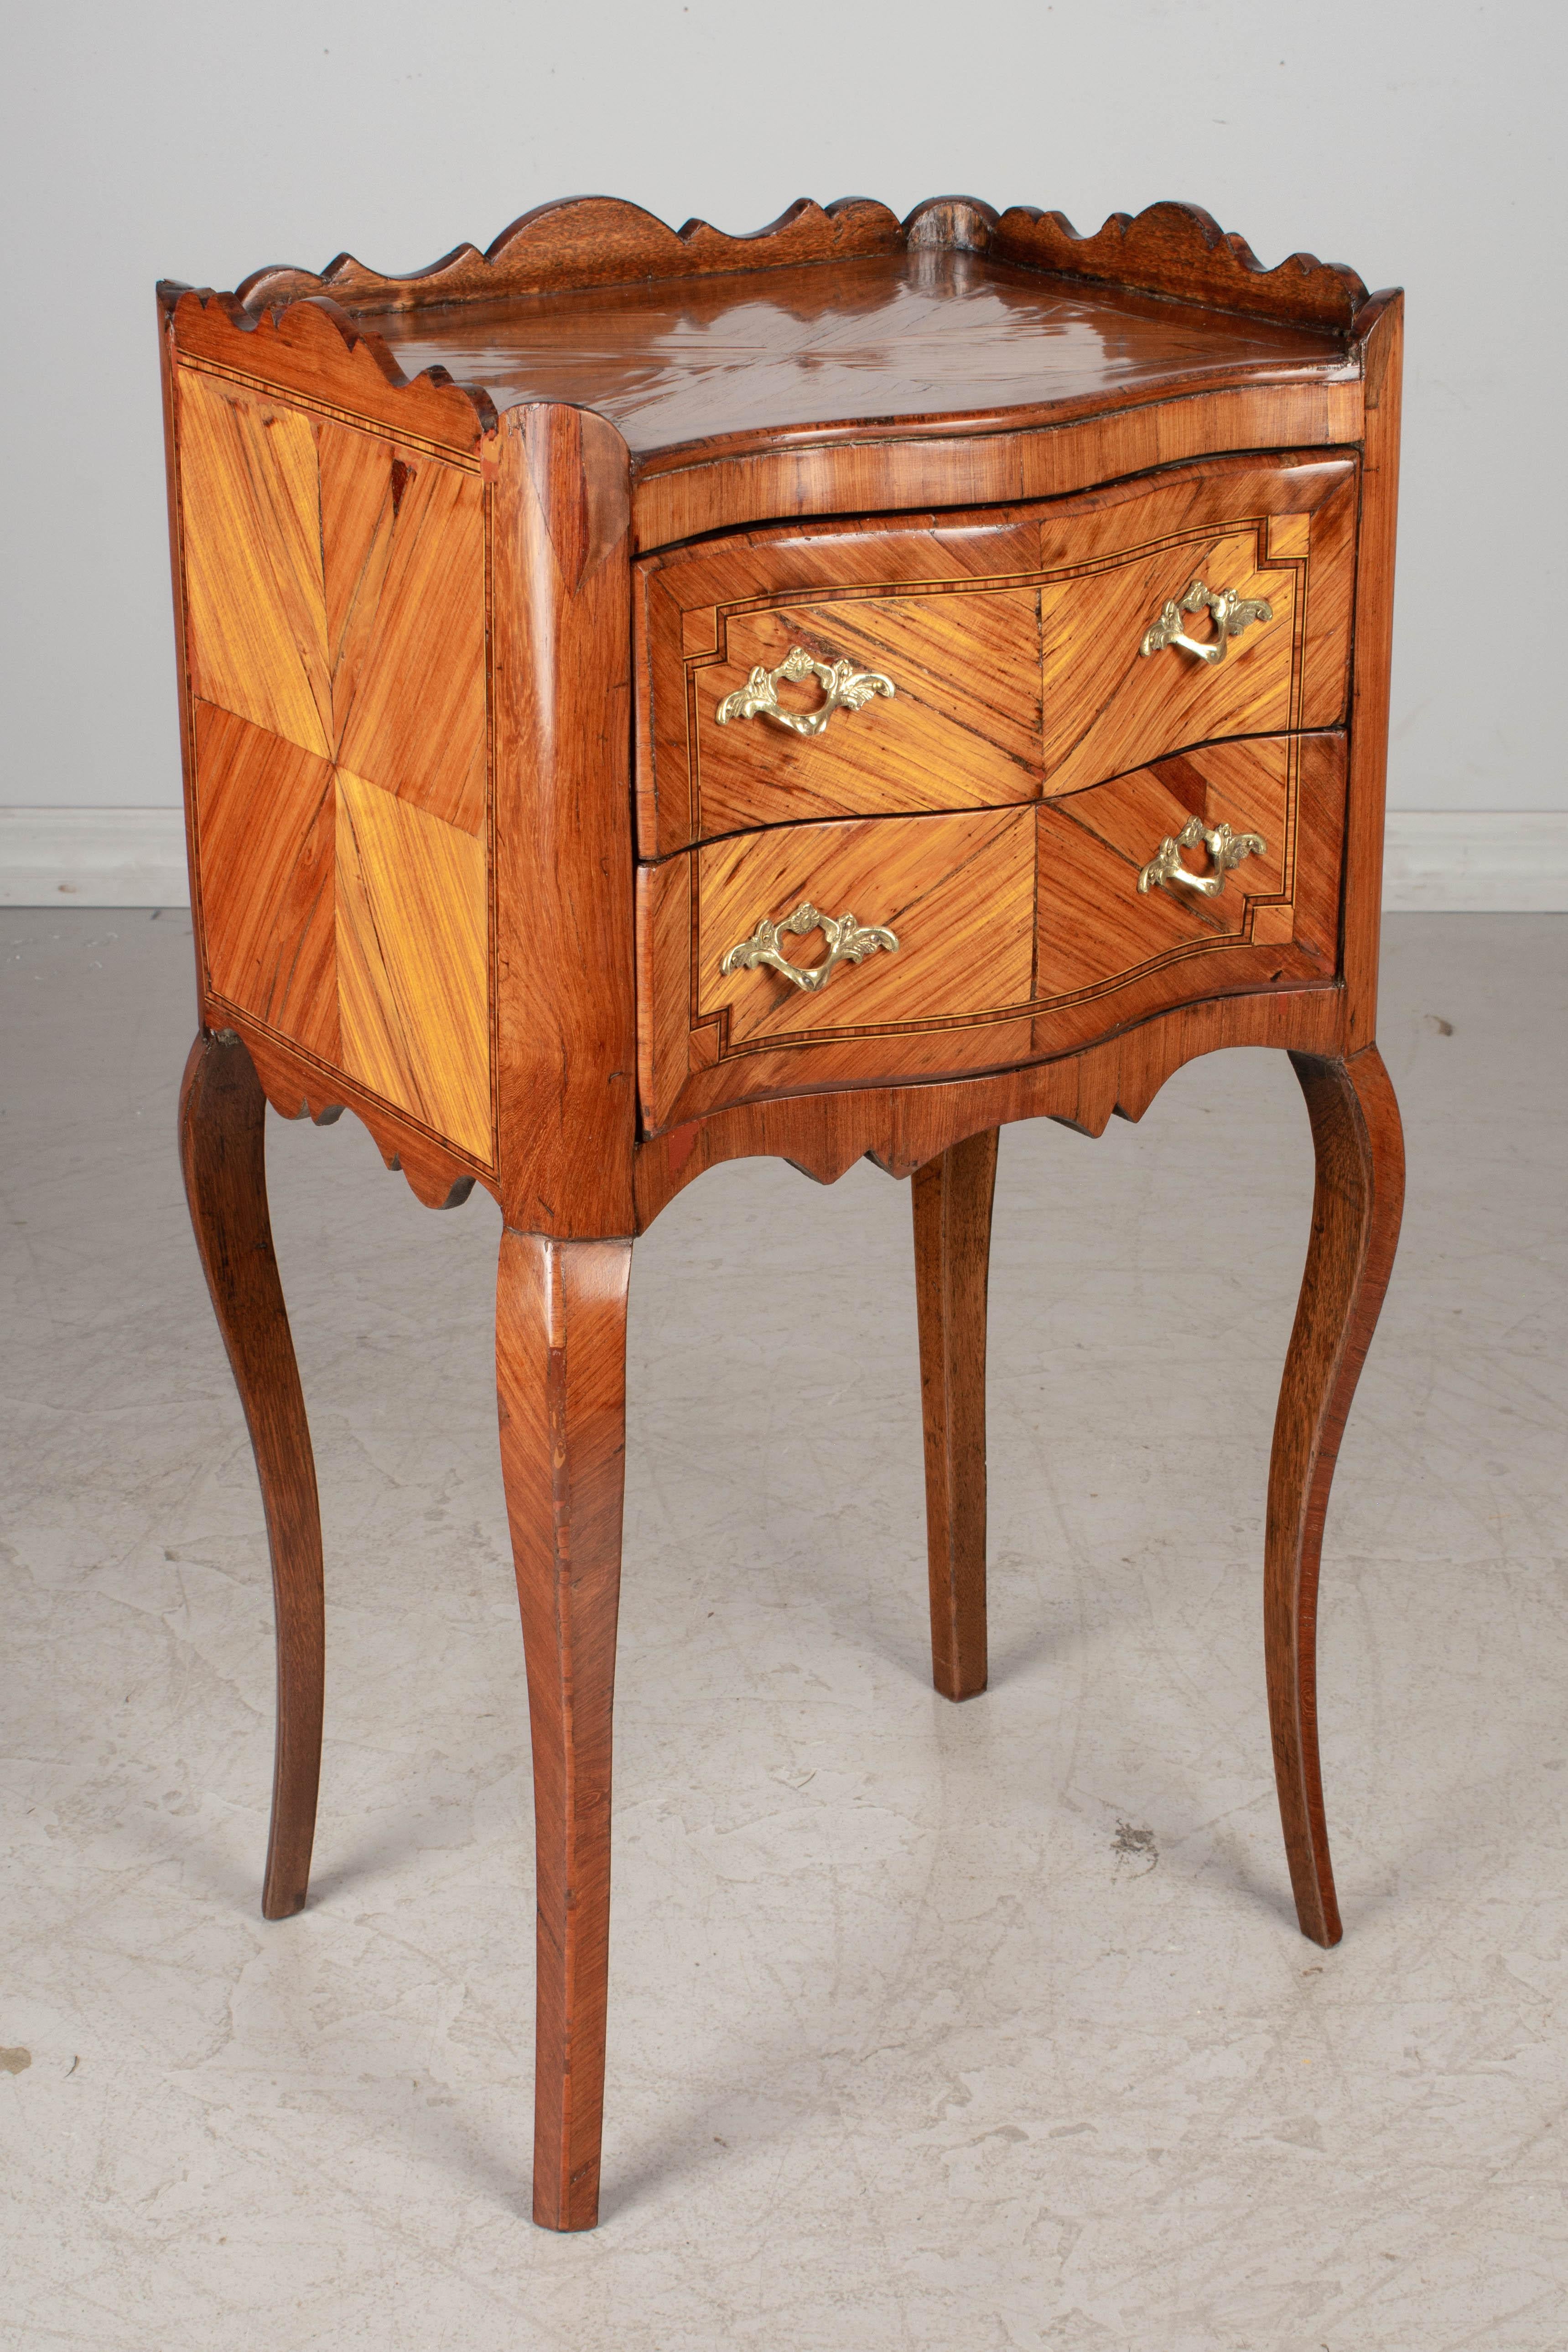 A 19th century Louis XV style French two-drawer side table, or night stand with inlaid marquetry veneers of walnut and mahogany. Cast bronze hardware. Nice proportions with curved corners and slender legs. Finished on all four sides. Some missing